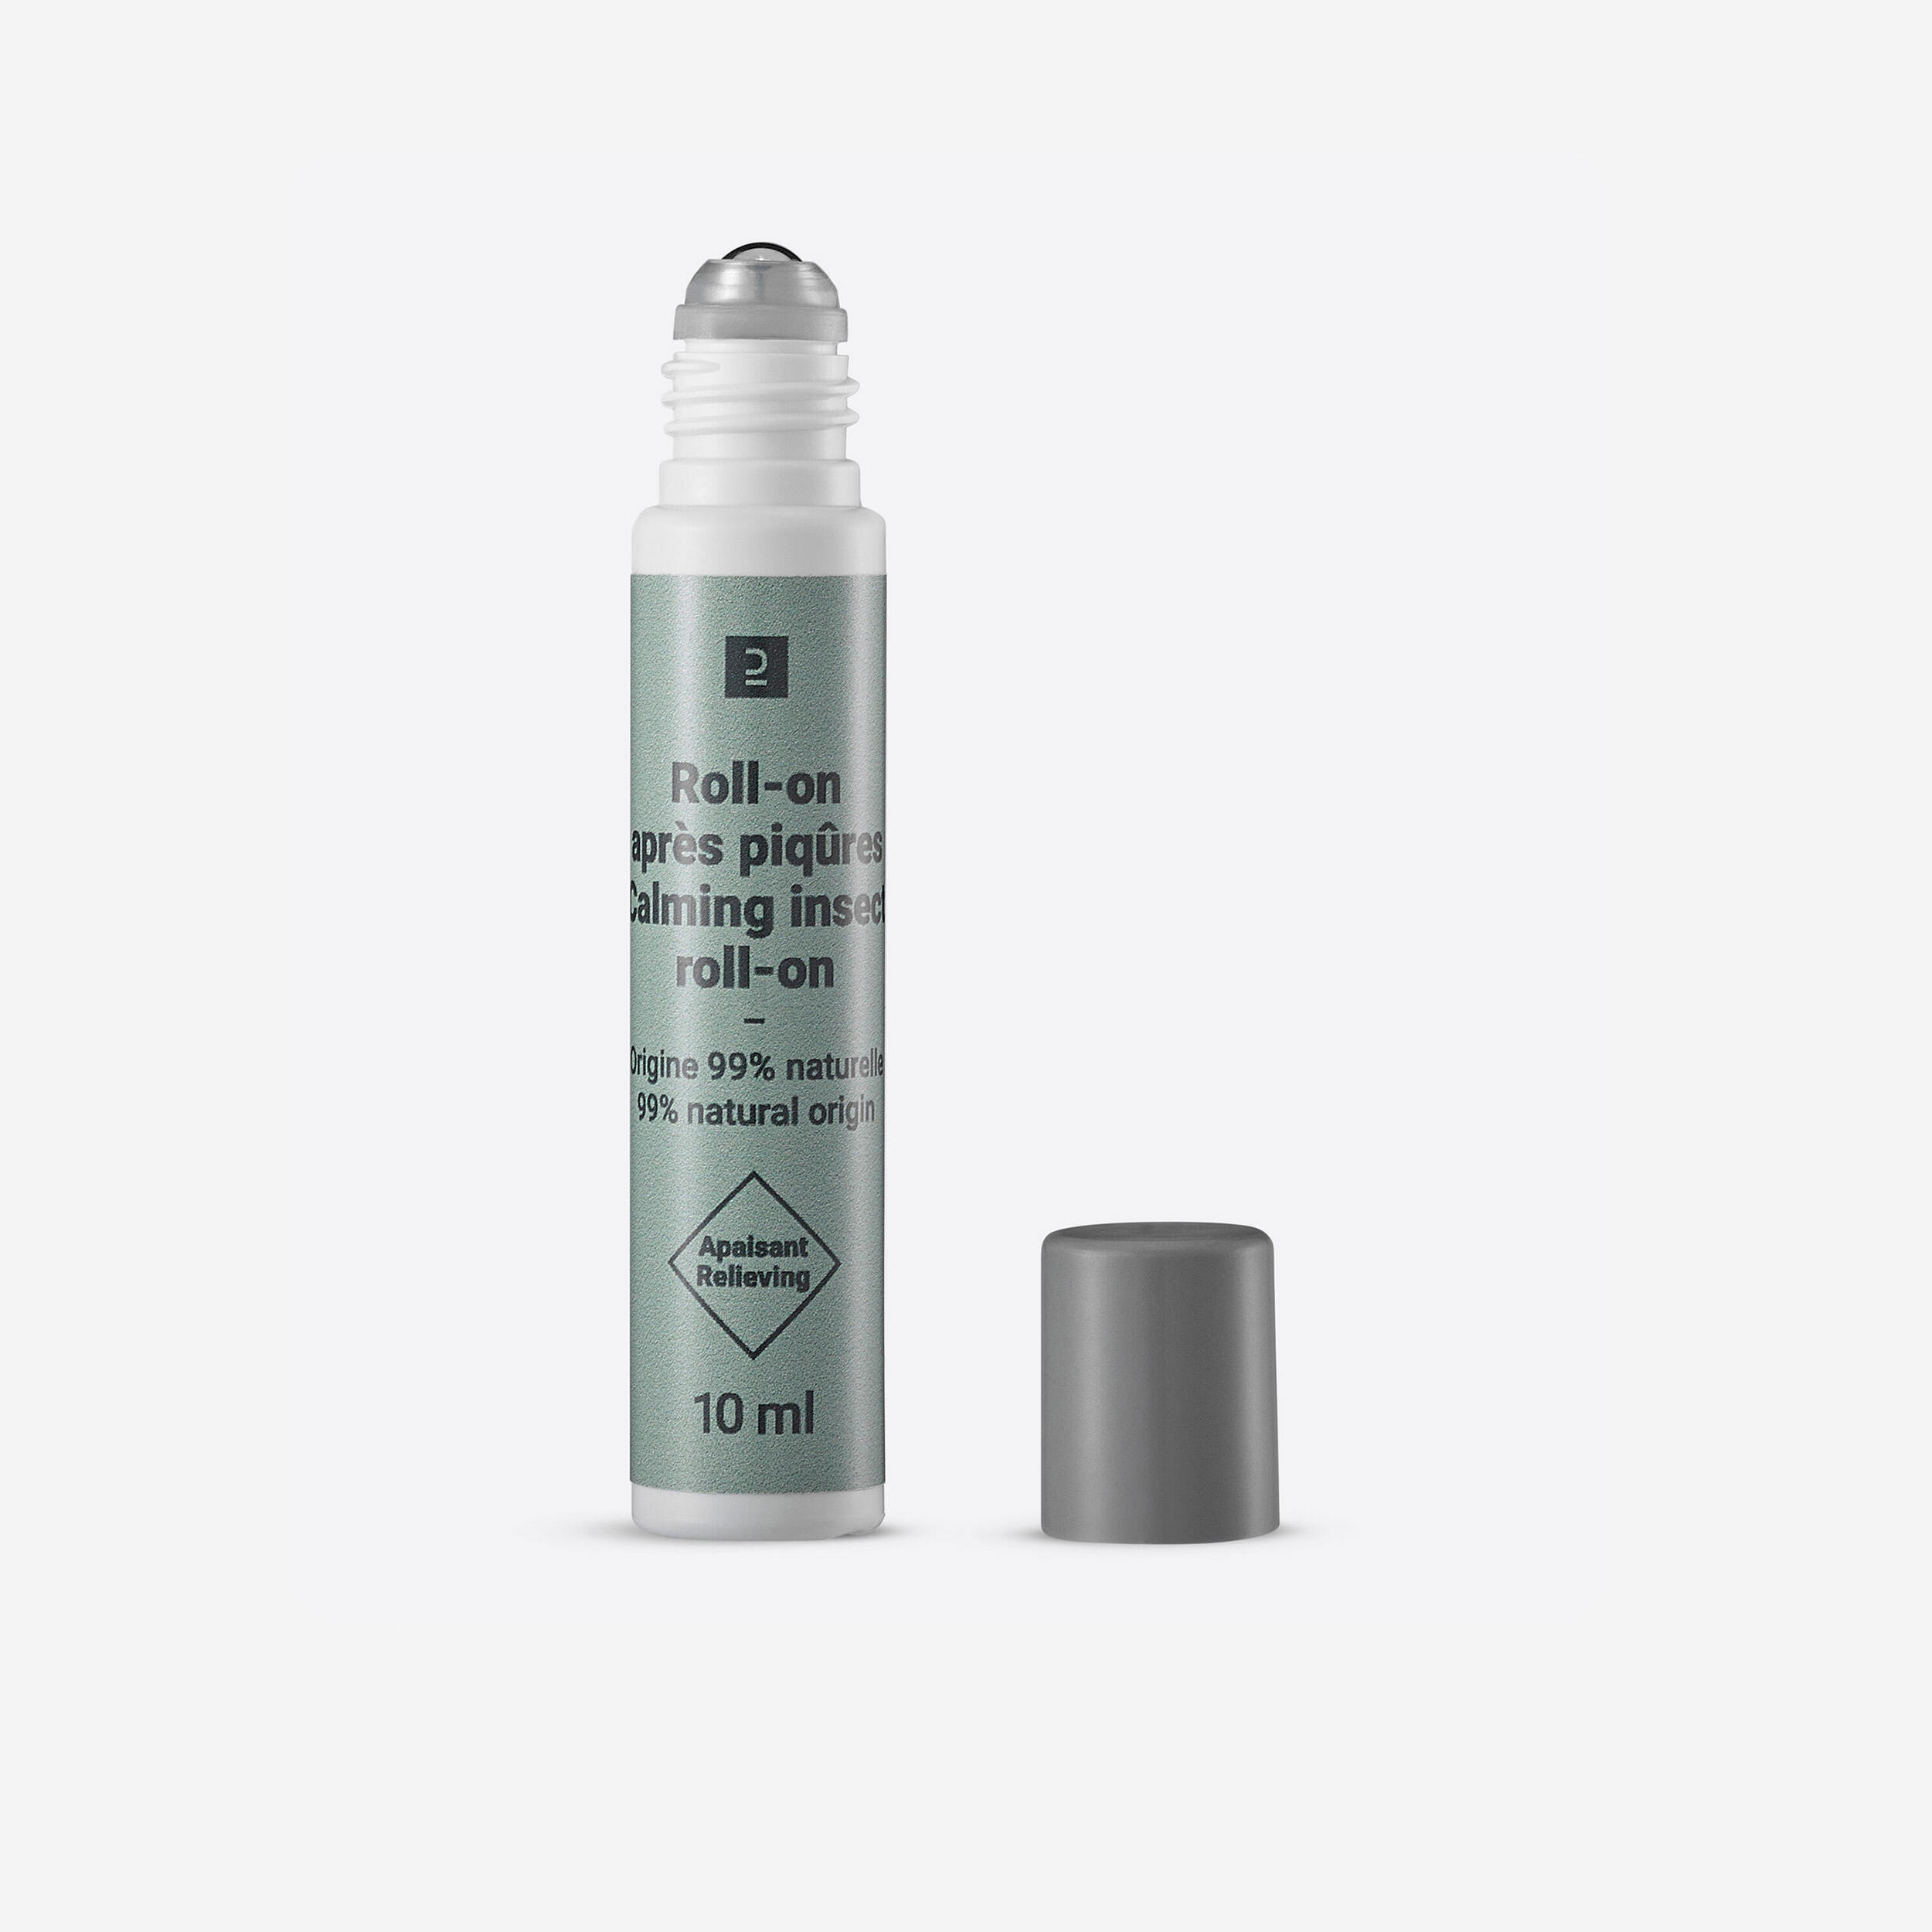 Insect Bite Relief Roll-on - Forclaz - 10 ml 1/2